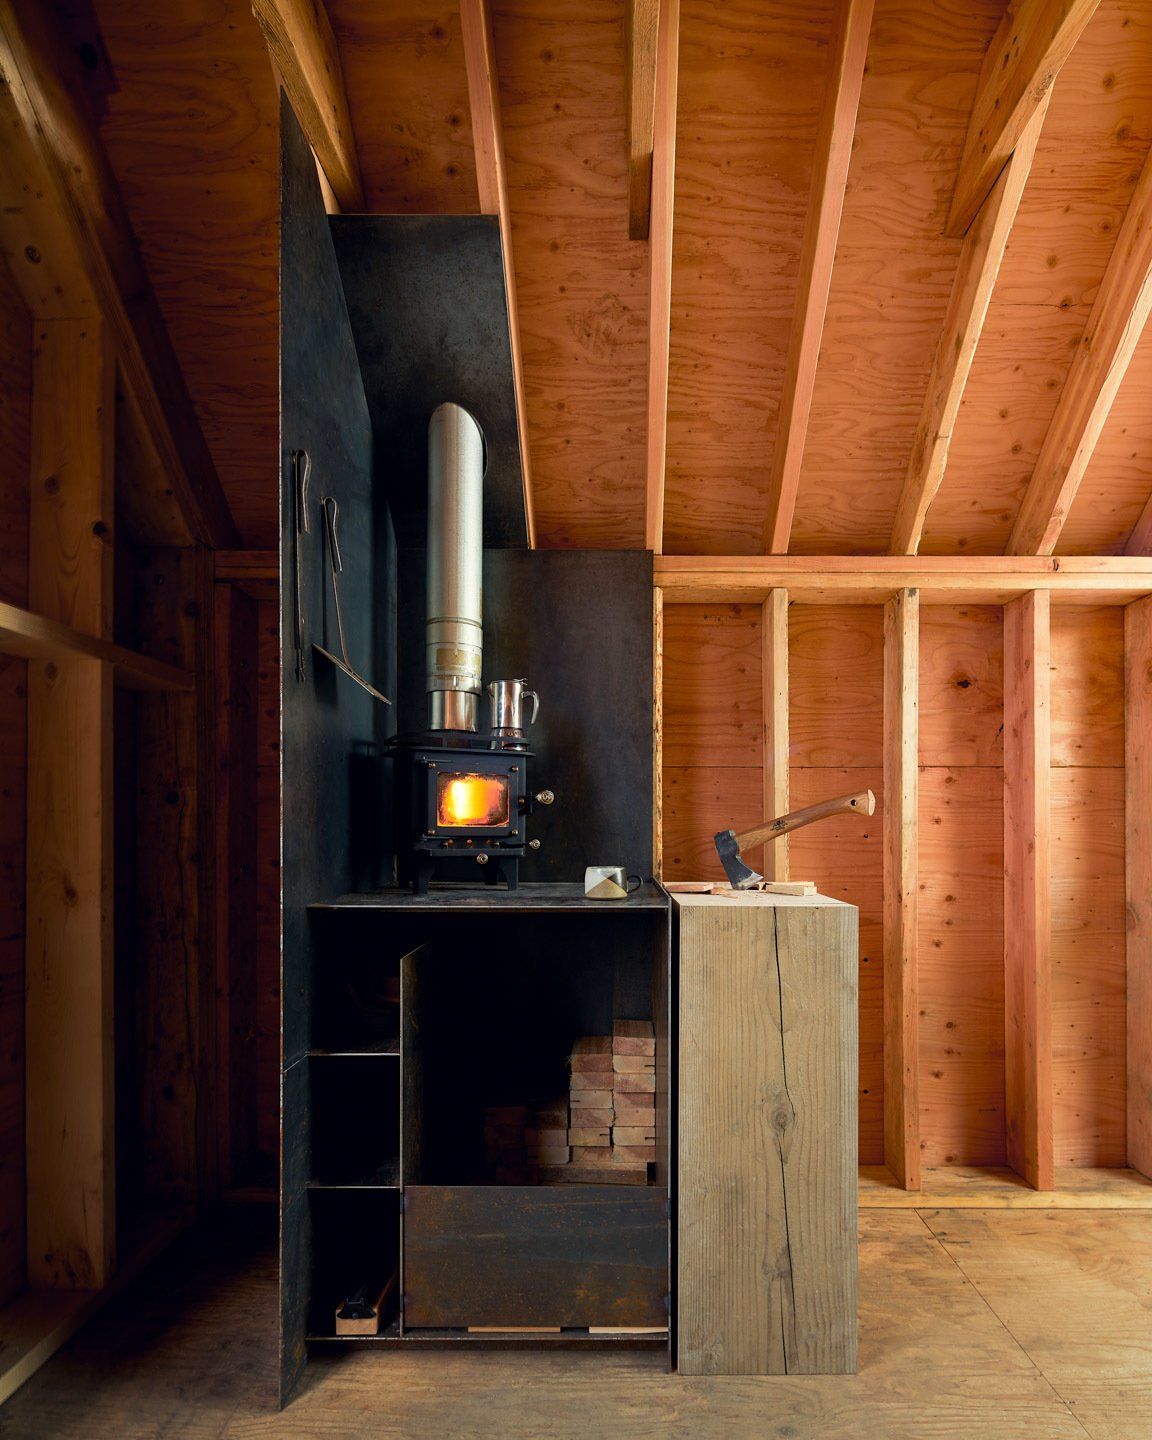 Inside, the cabin looks very cozy, especially with this wood-burning stove in the corner